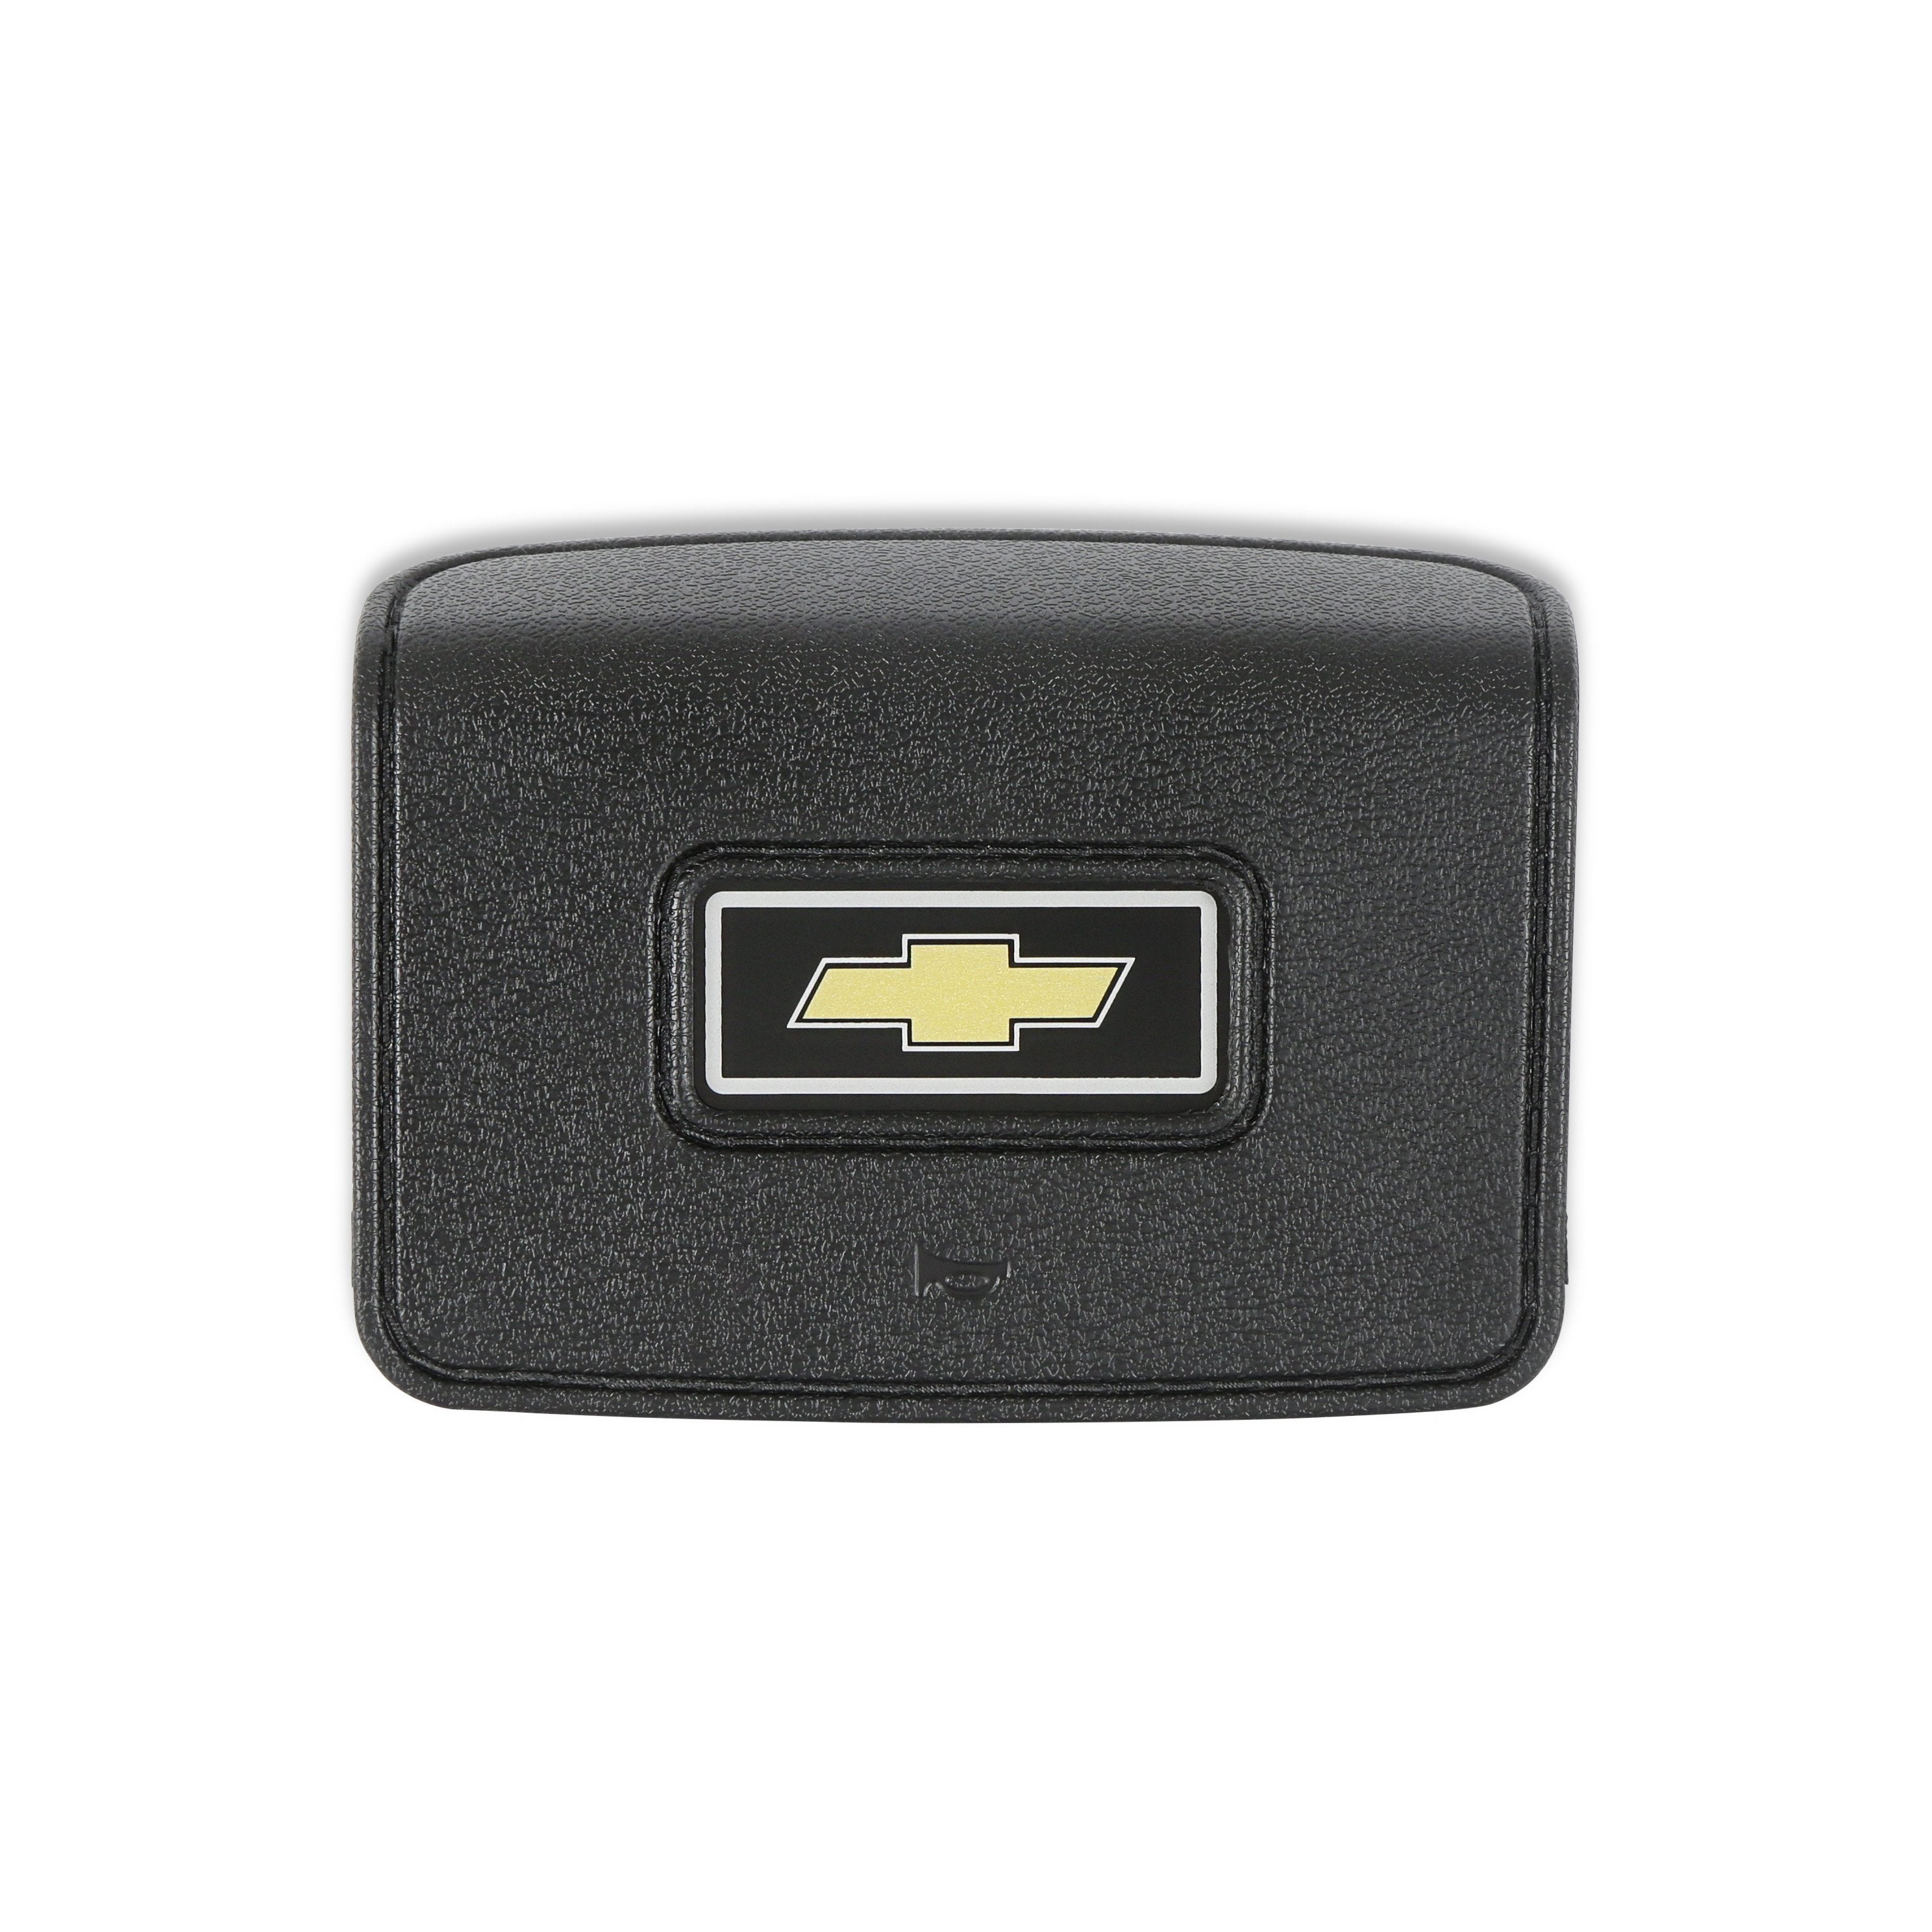 BROTHERS Horn Button 05-208